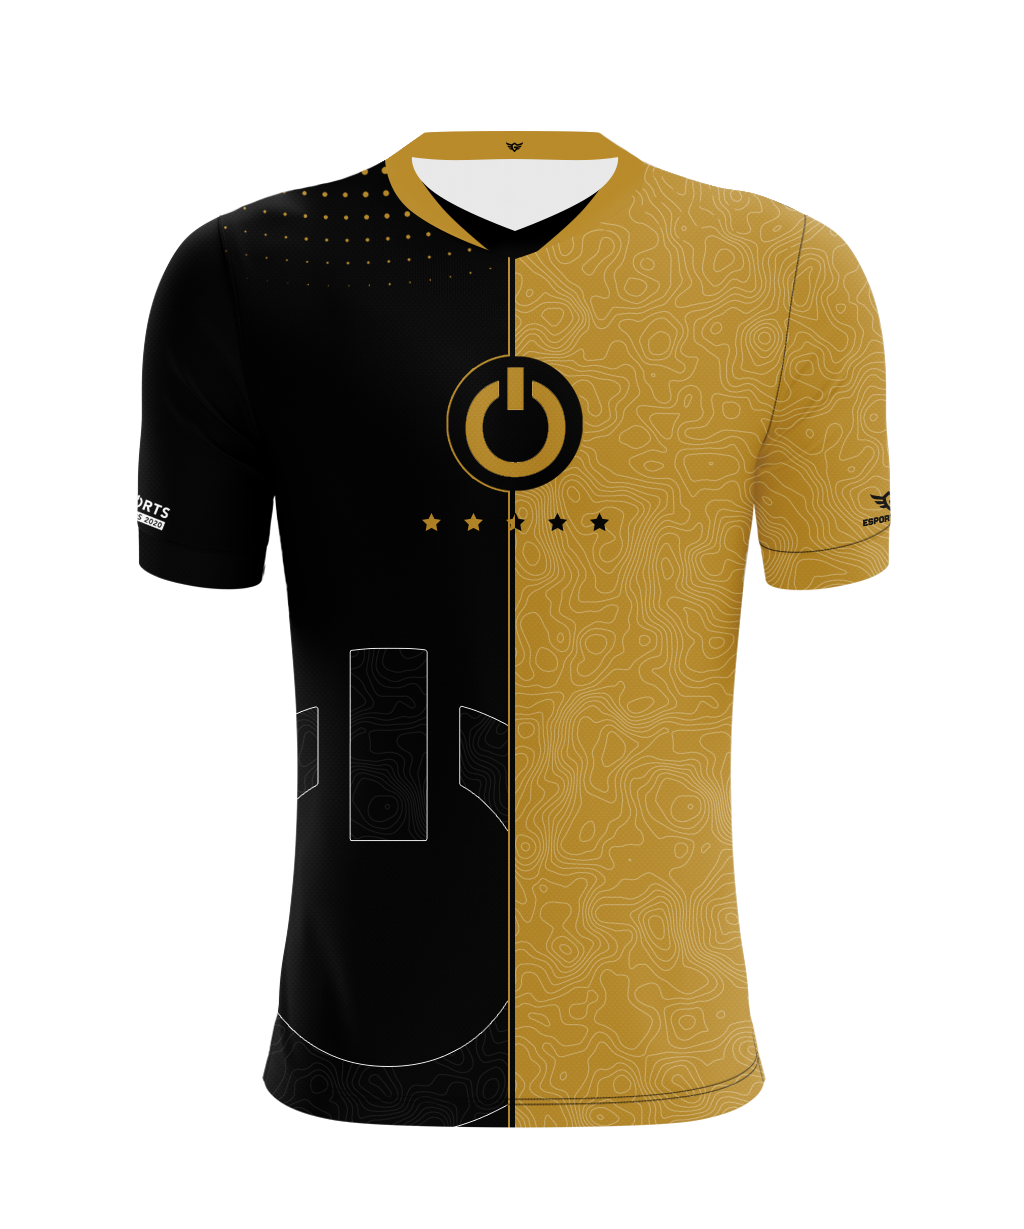 Esports Awards 2020 Special Edition Black Jersey [LIMITED TO 200 UNITS]